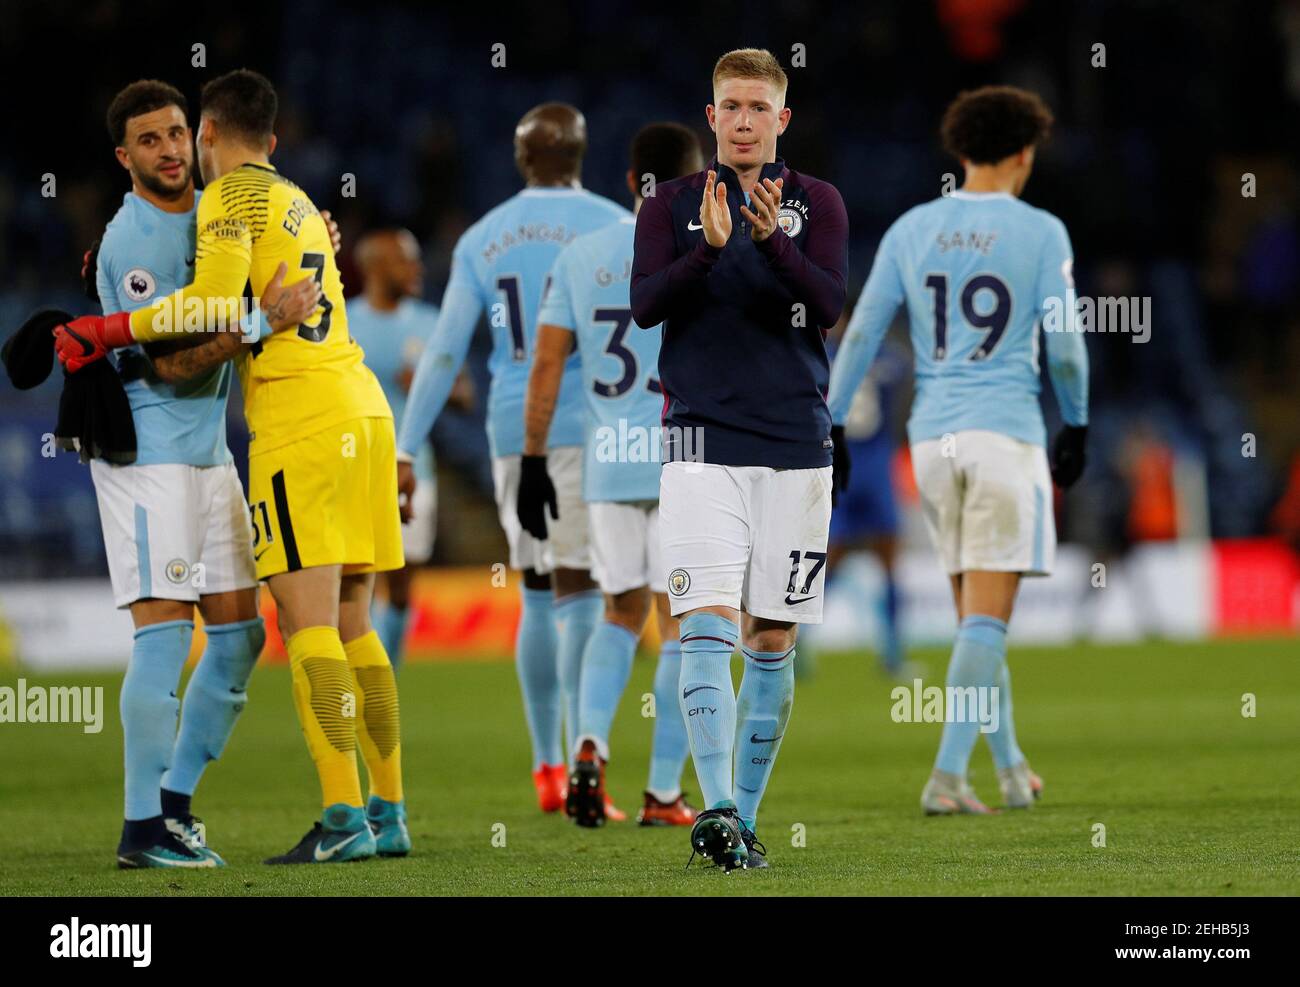 Soccer Football - Premier League - Leicester City vs Manchester City - King Power Stadium, Leicester, Britain - November 18, 2017   Manchester City's Kevin De Bruyne applauds fans after the match                  REUTERS/Darren Staples    EDITORIAL USE ONLY. No use with unauthorized audio, video, data, fixture lists, club/league logos or 'live' services. Online in-match use limited to 75 images, no video emulation. No use in betting, games or single club/league/player publications. Please contact your account representative for further details. Stock Photo